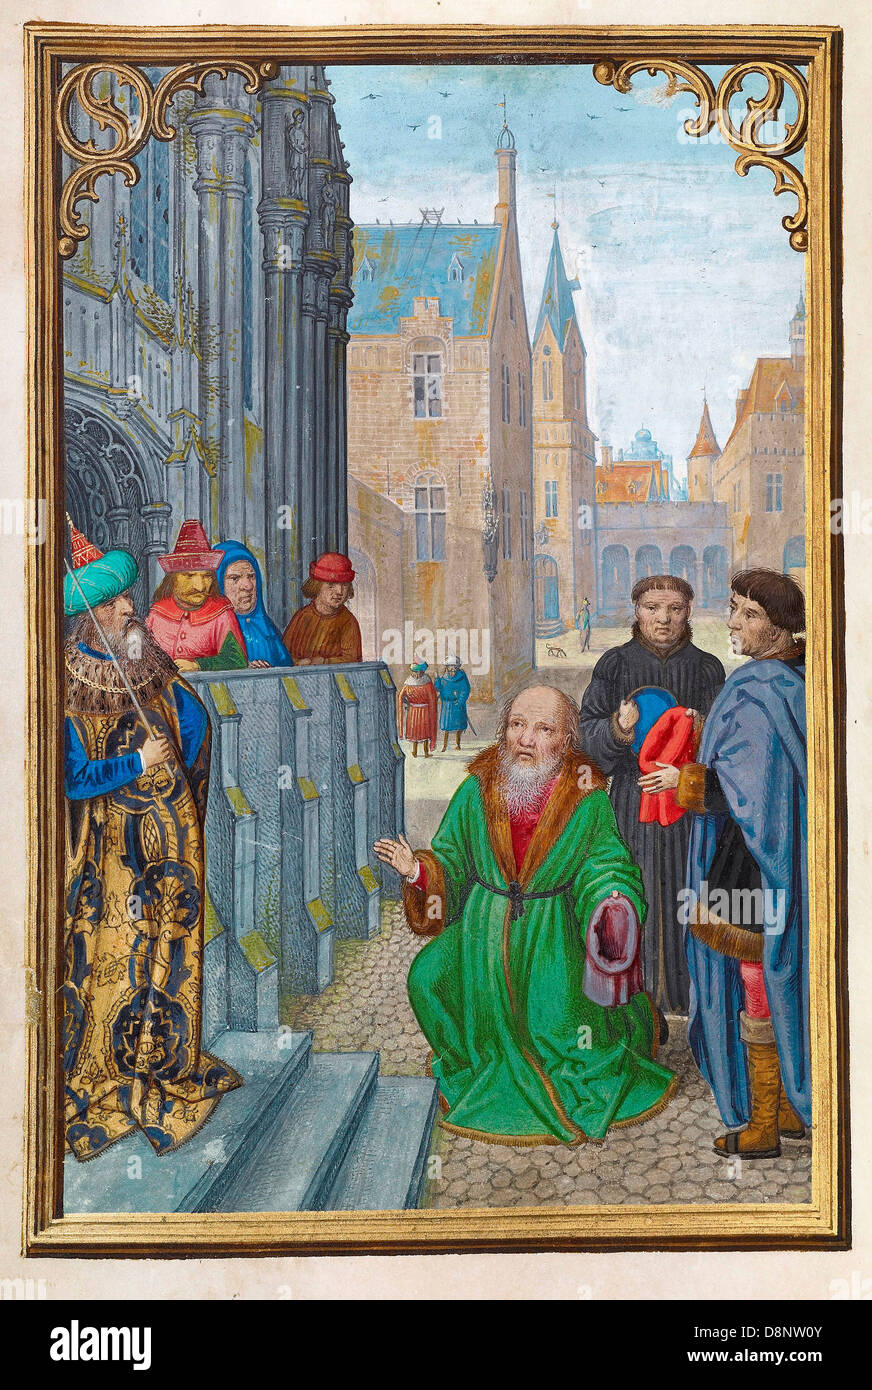 Simon Bening, Joseph of Arimathea Before Pilate 1525-1530 Oil on canvas. Tempera colors, gold paint, and gold leaf on parchment. Stock Photo